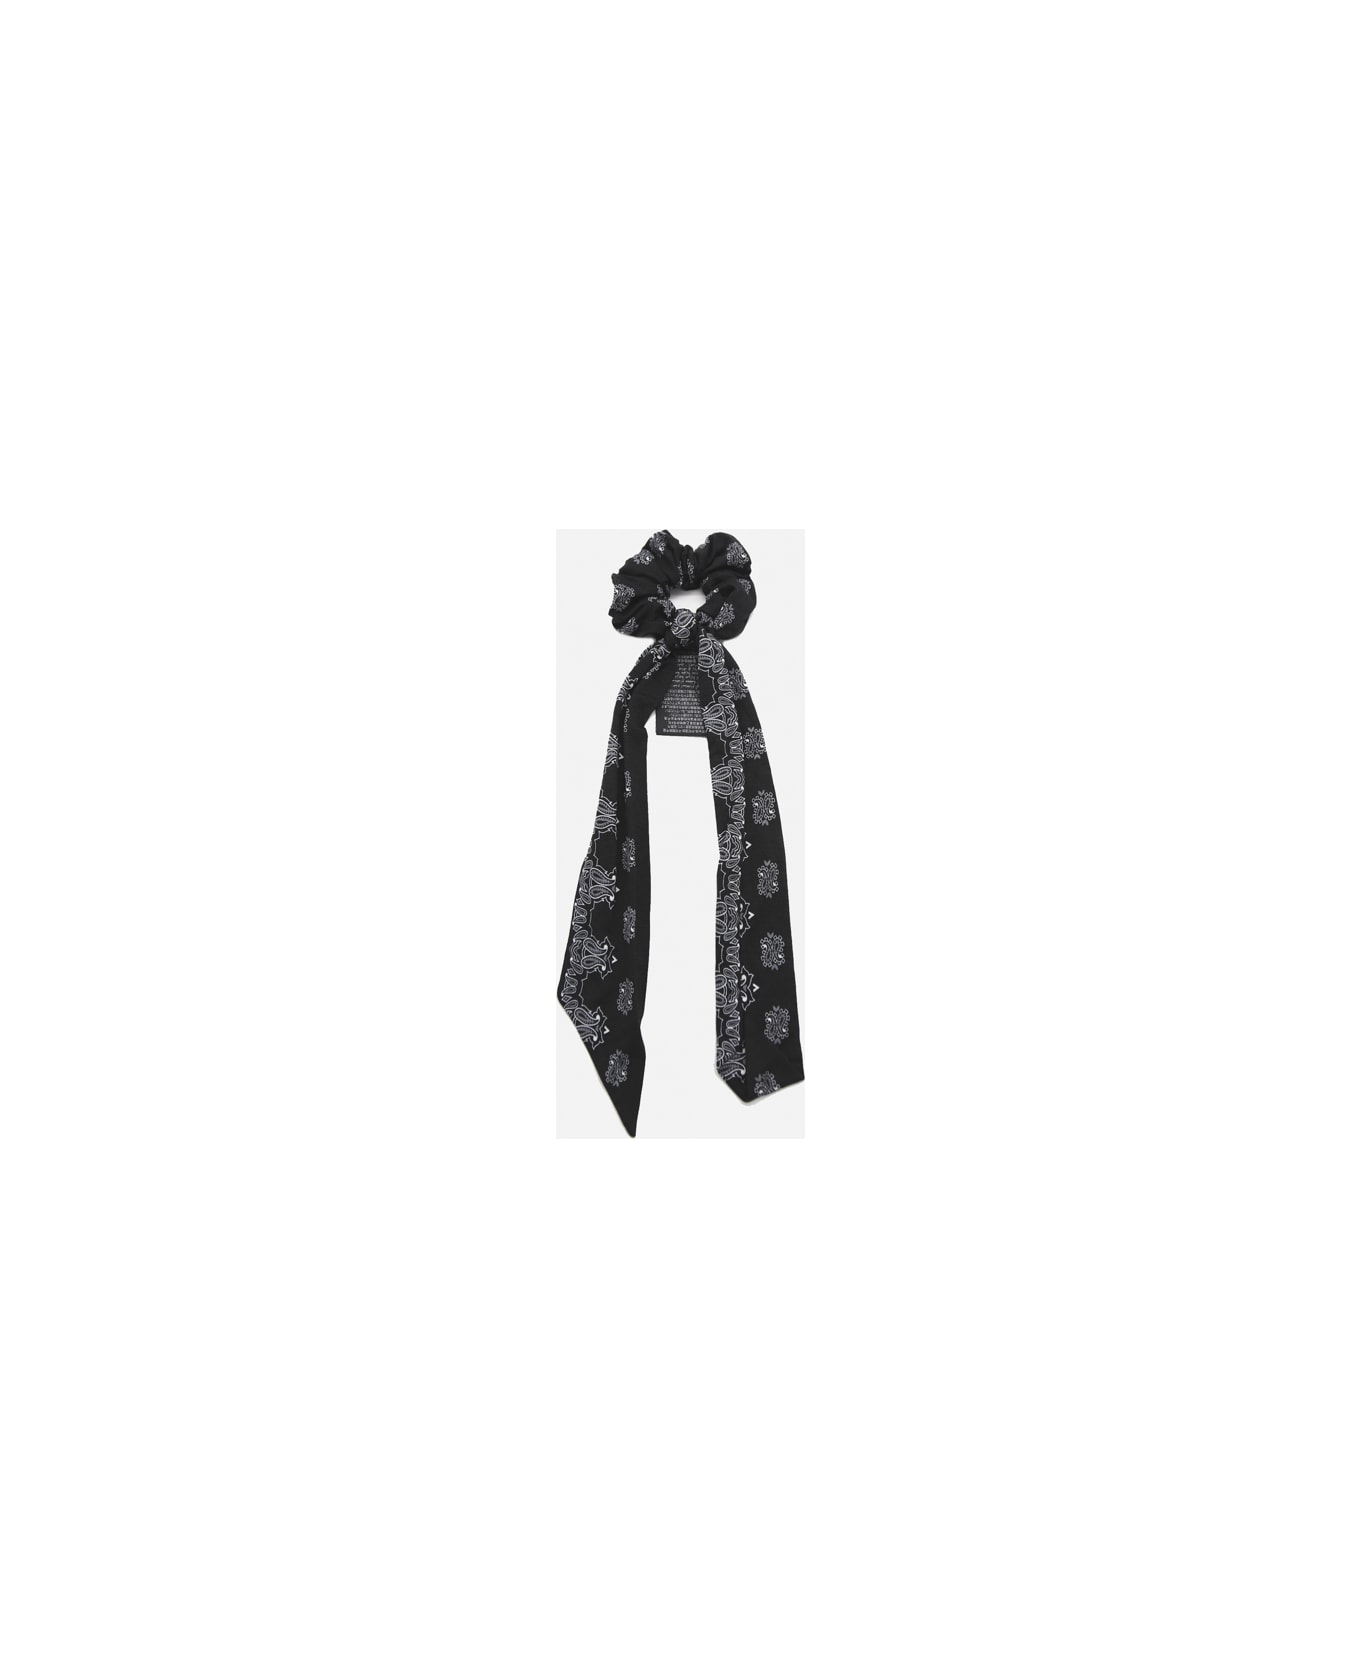 Saint Laurent Stretch Fabric Scrunchie With All-over Bandana Print - Black, white